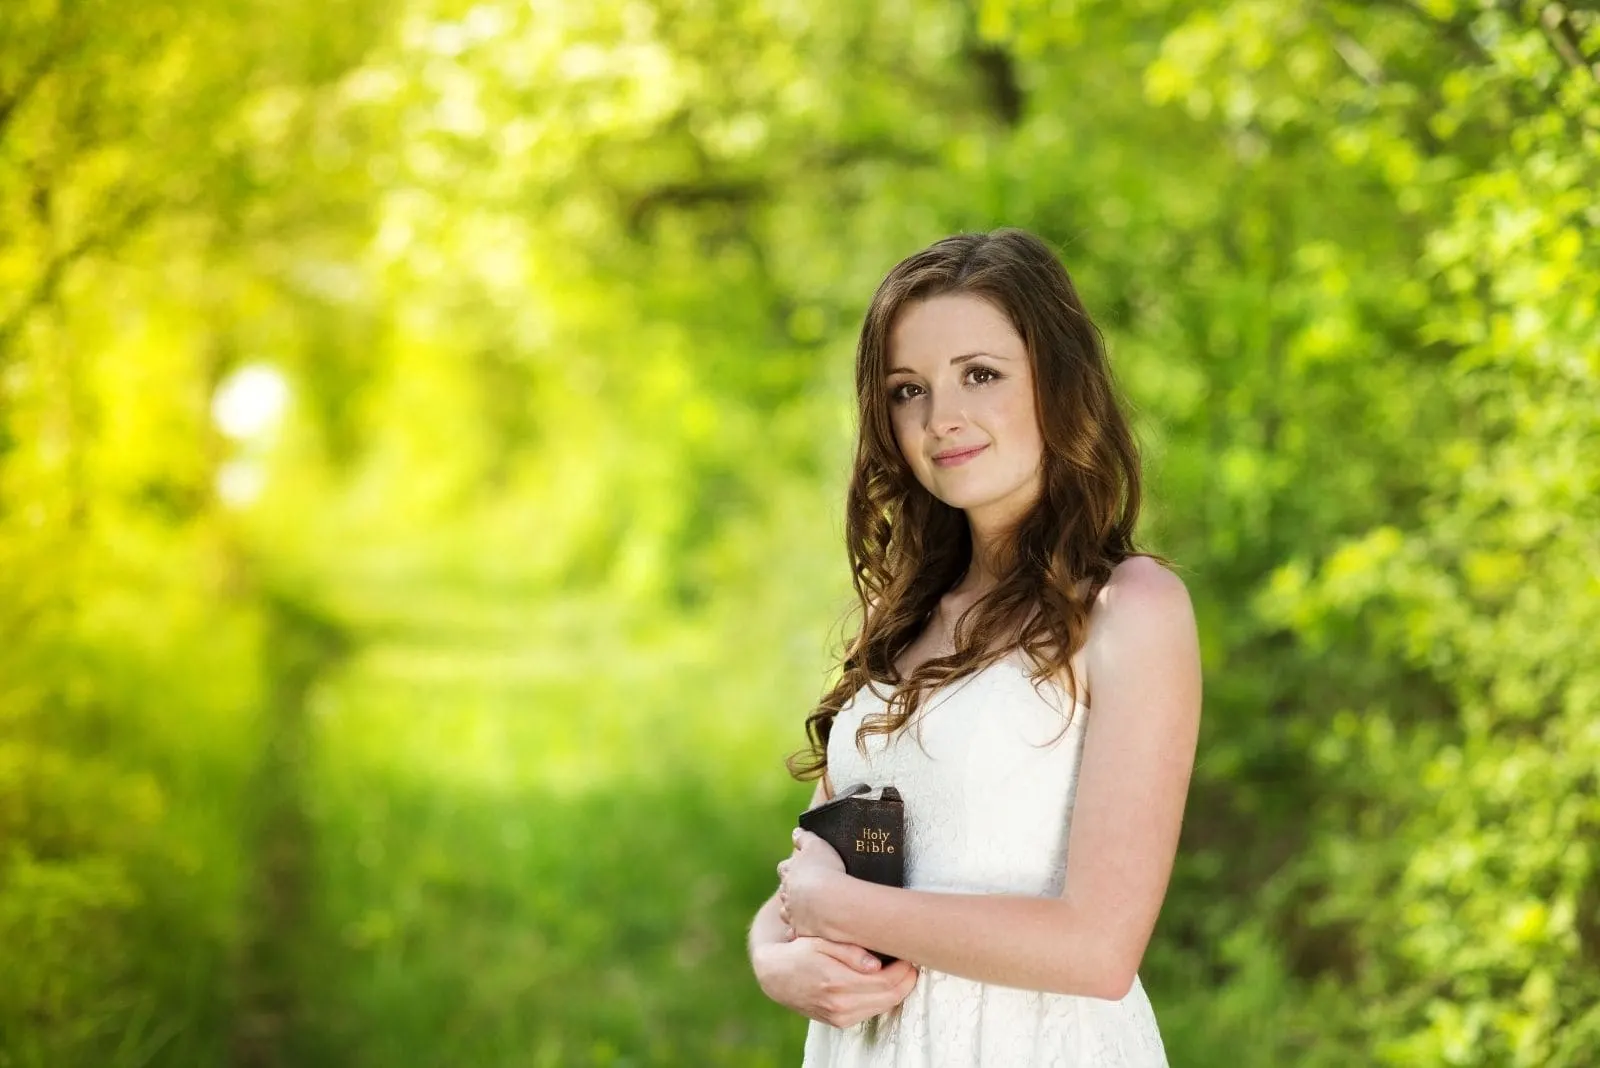 beautiful woman with a bible smiling and standing in the green garden wearing a dress